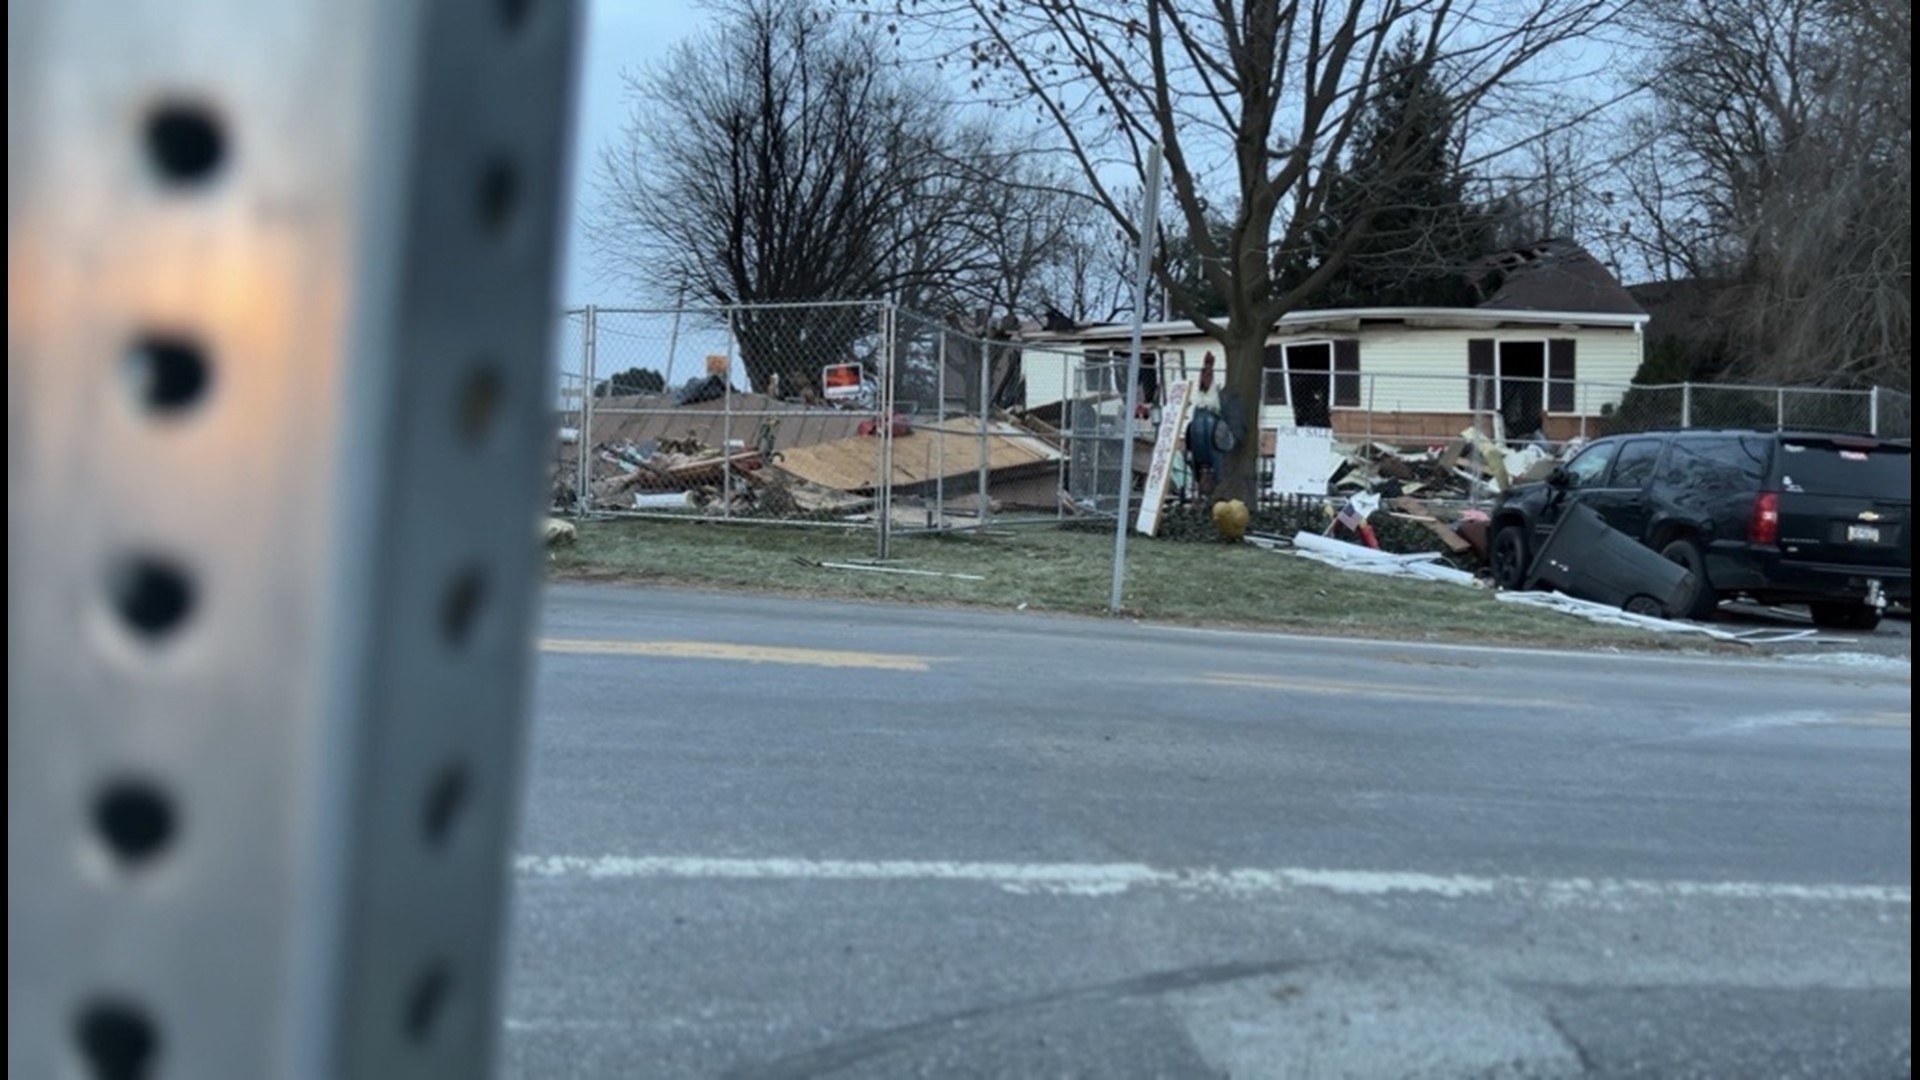 Two days before Christmas, a home explosion rocked a quiet intersection of East Earl Township, leaving a Lancaster County family with only their lives.